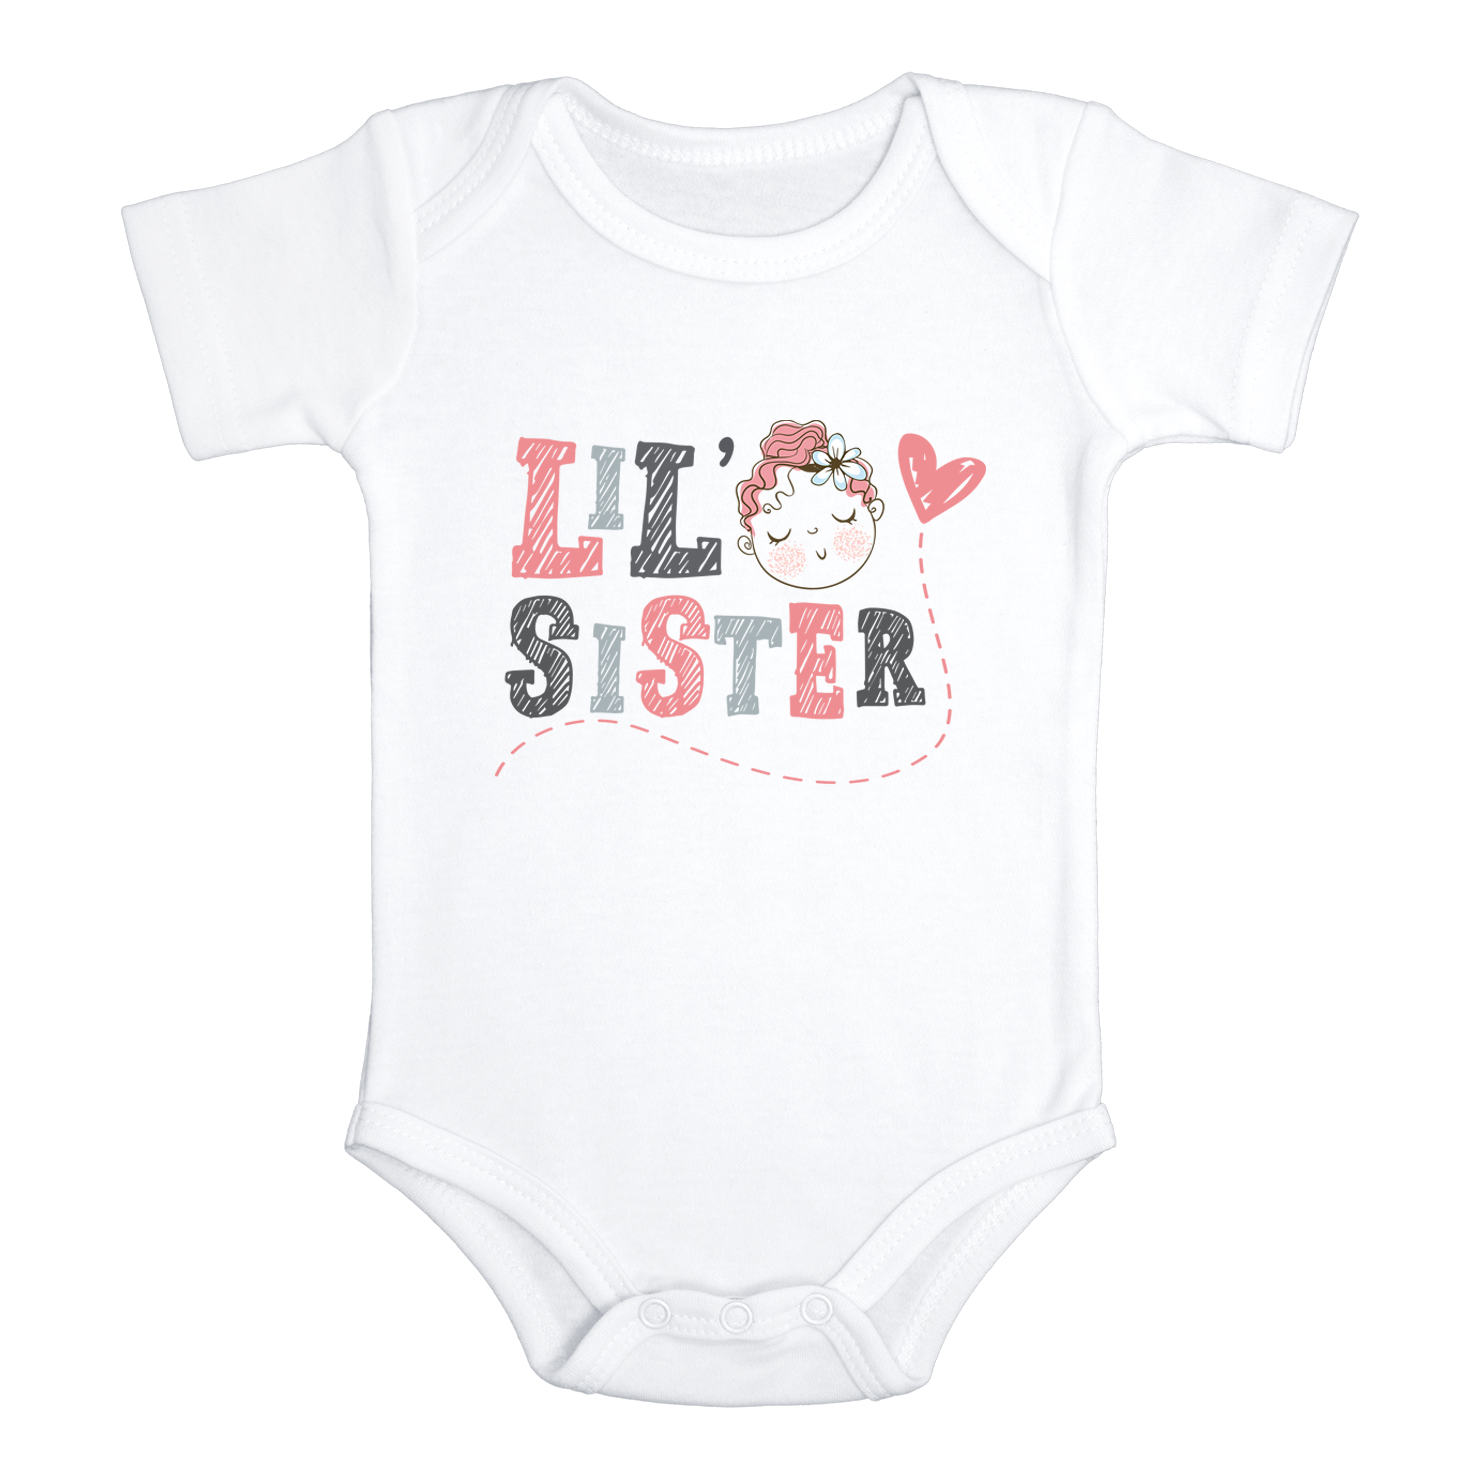 LIL' SISTER Funny Baby Sister Onesie Baby Girl Body Suit White - HappyAddition